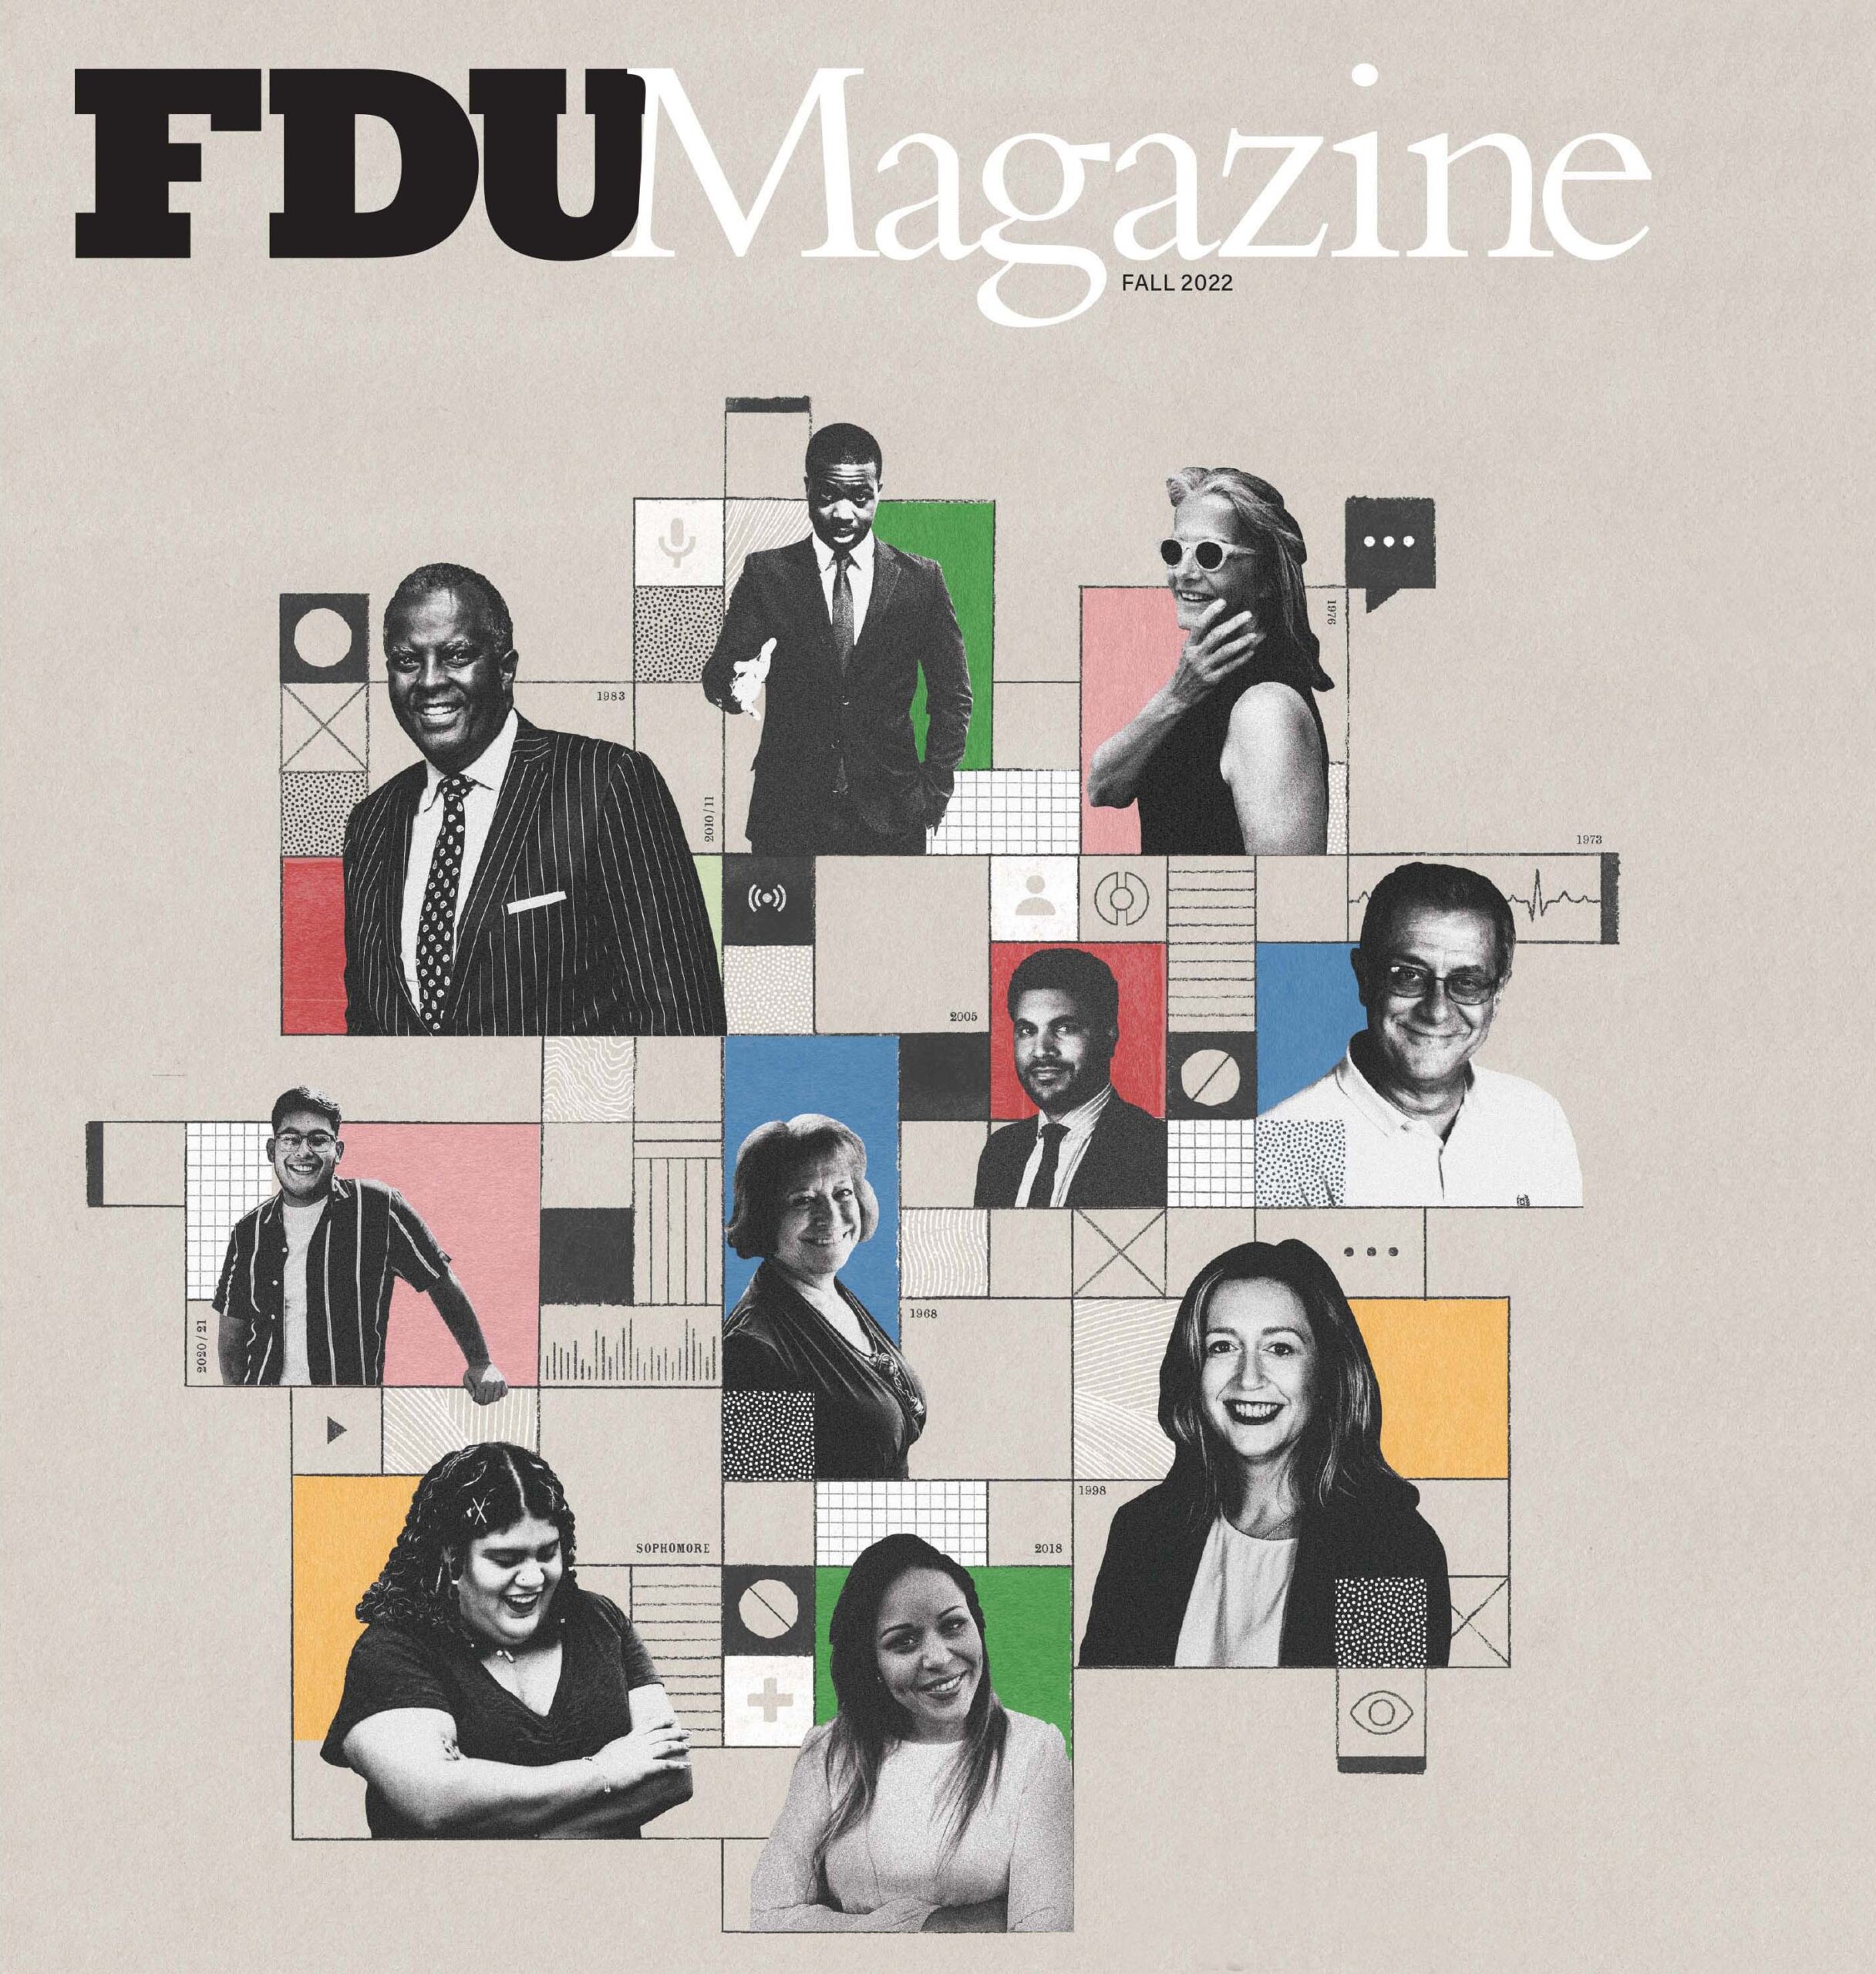 A collage of portraits of first-generation alumni.